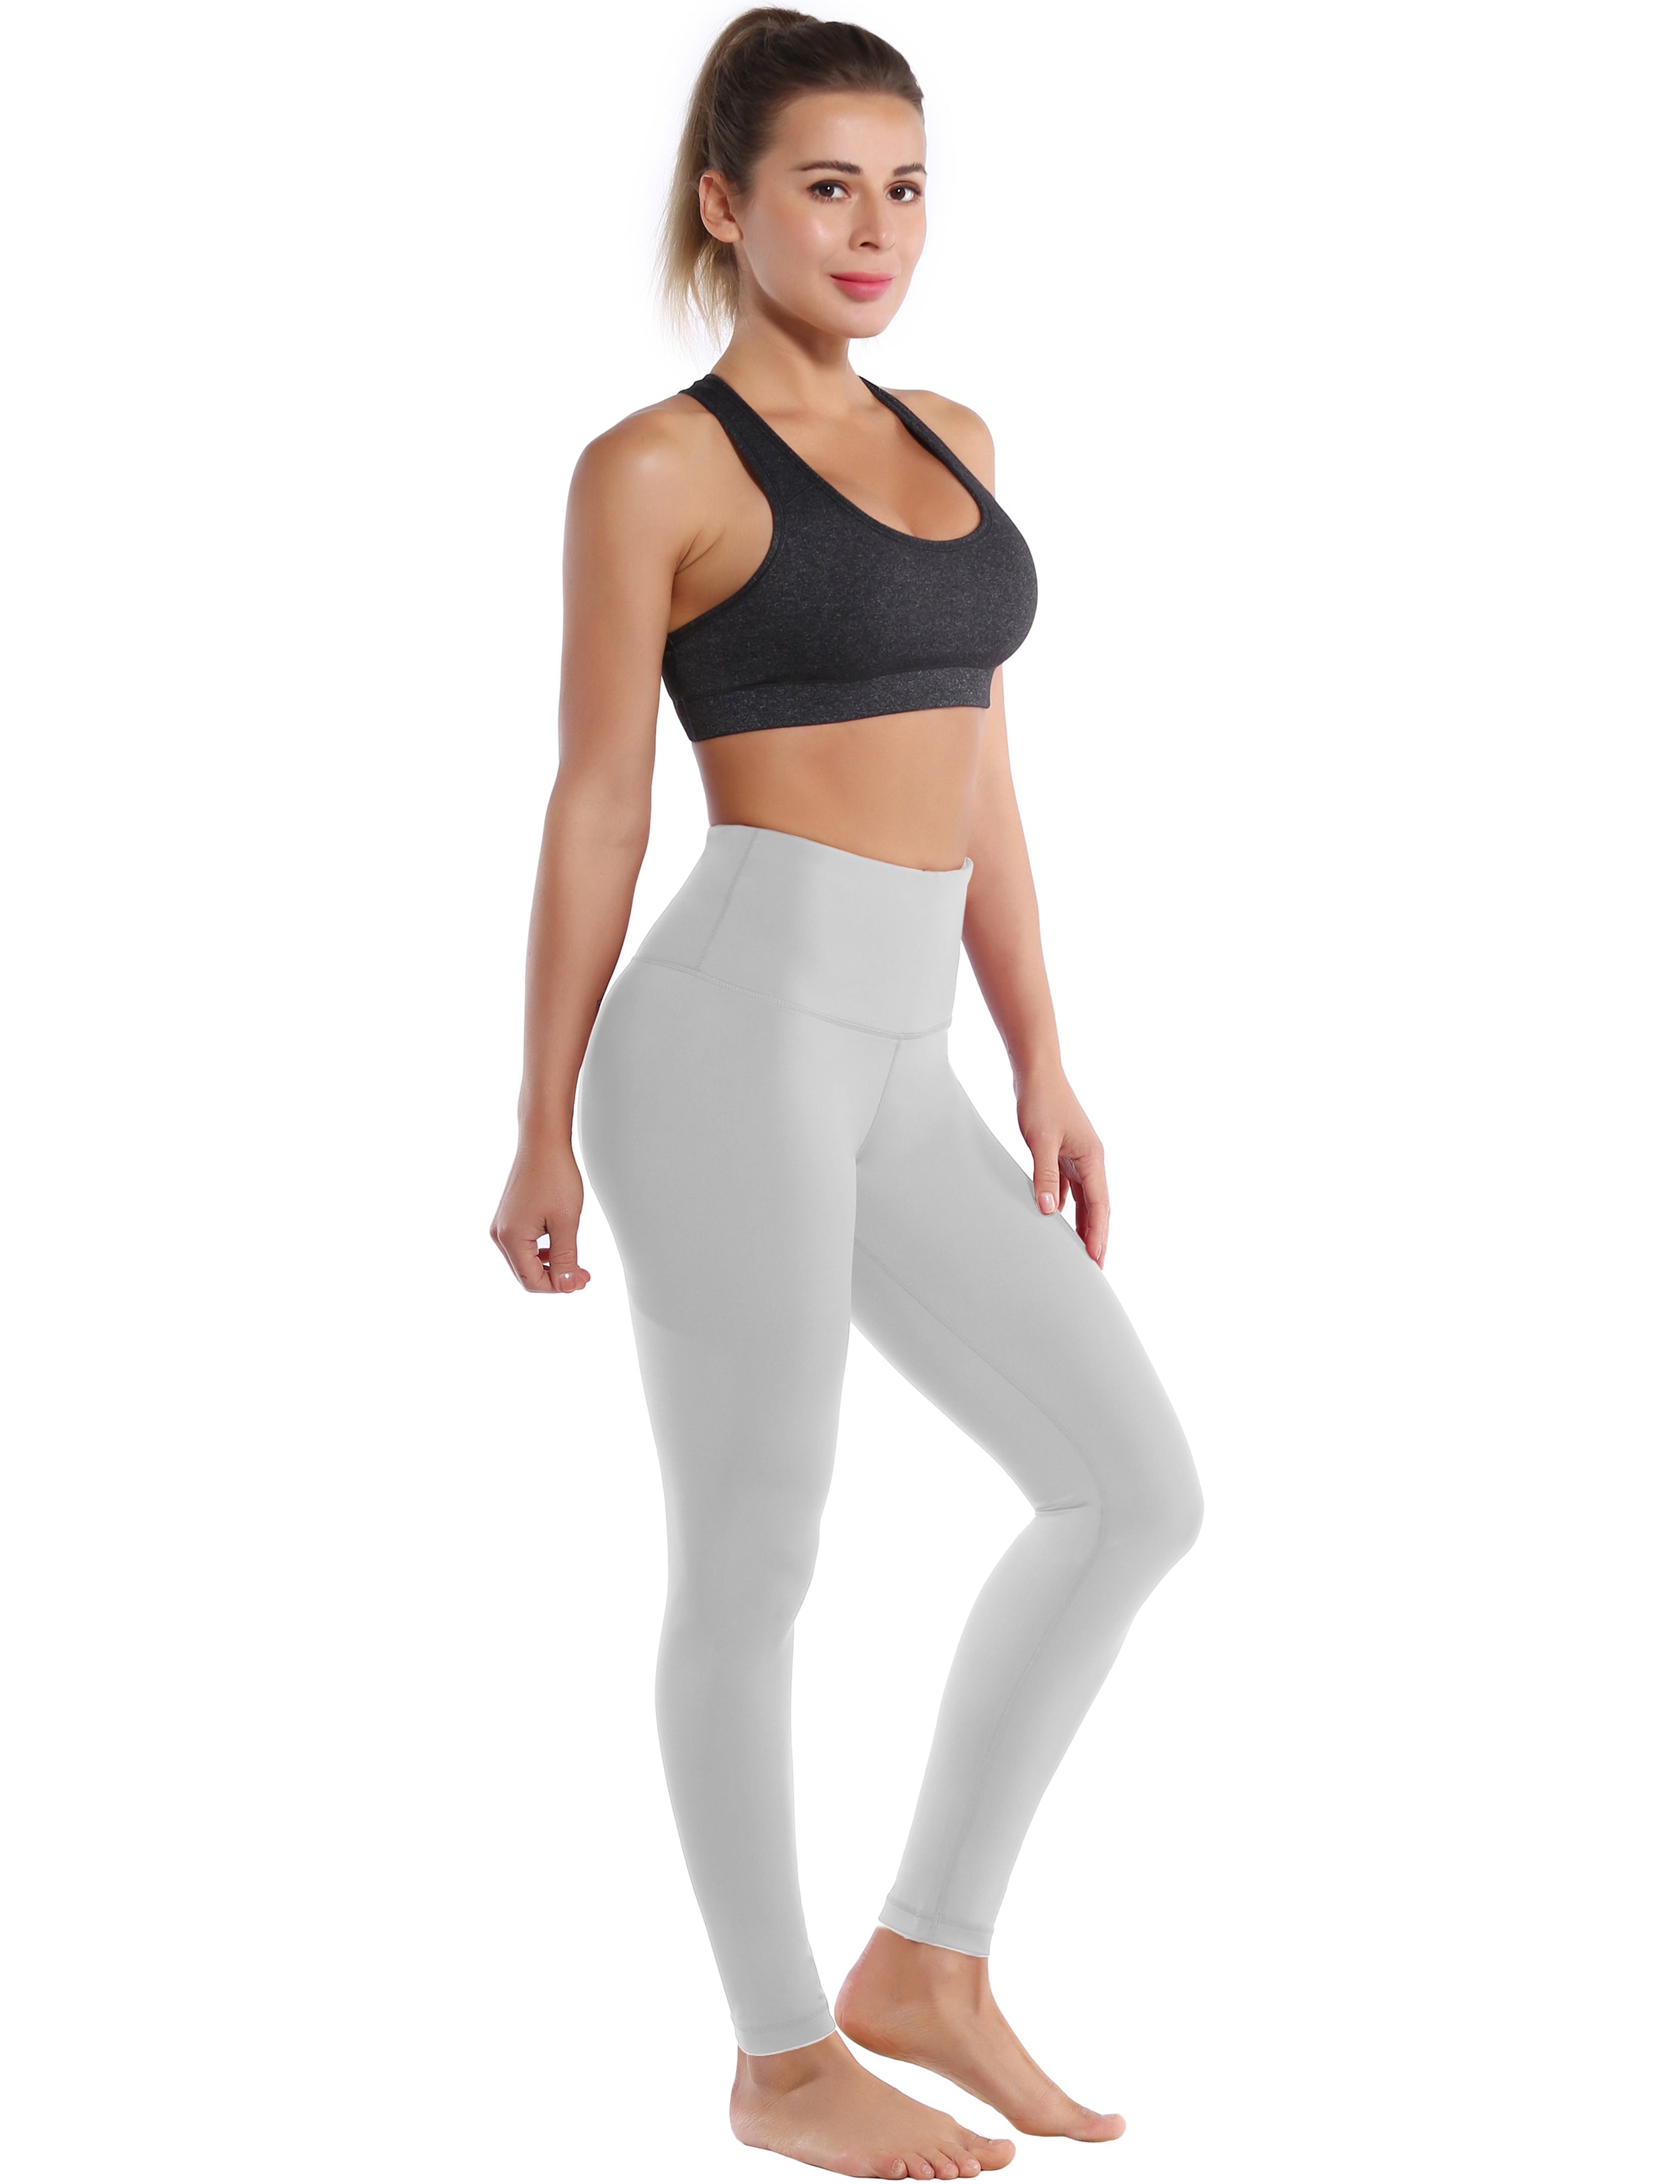 High Waist Golf Pants lightgray 75%Nylon/25%Spandex Fabric doesn't attract lint easily 4-way stretch No see-through Moisture-wicking Tummy control Inner pocket Four lengths